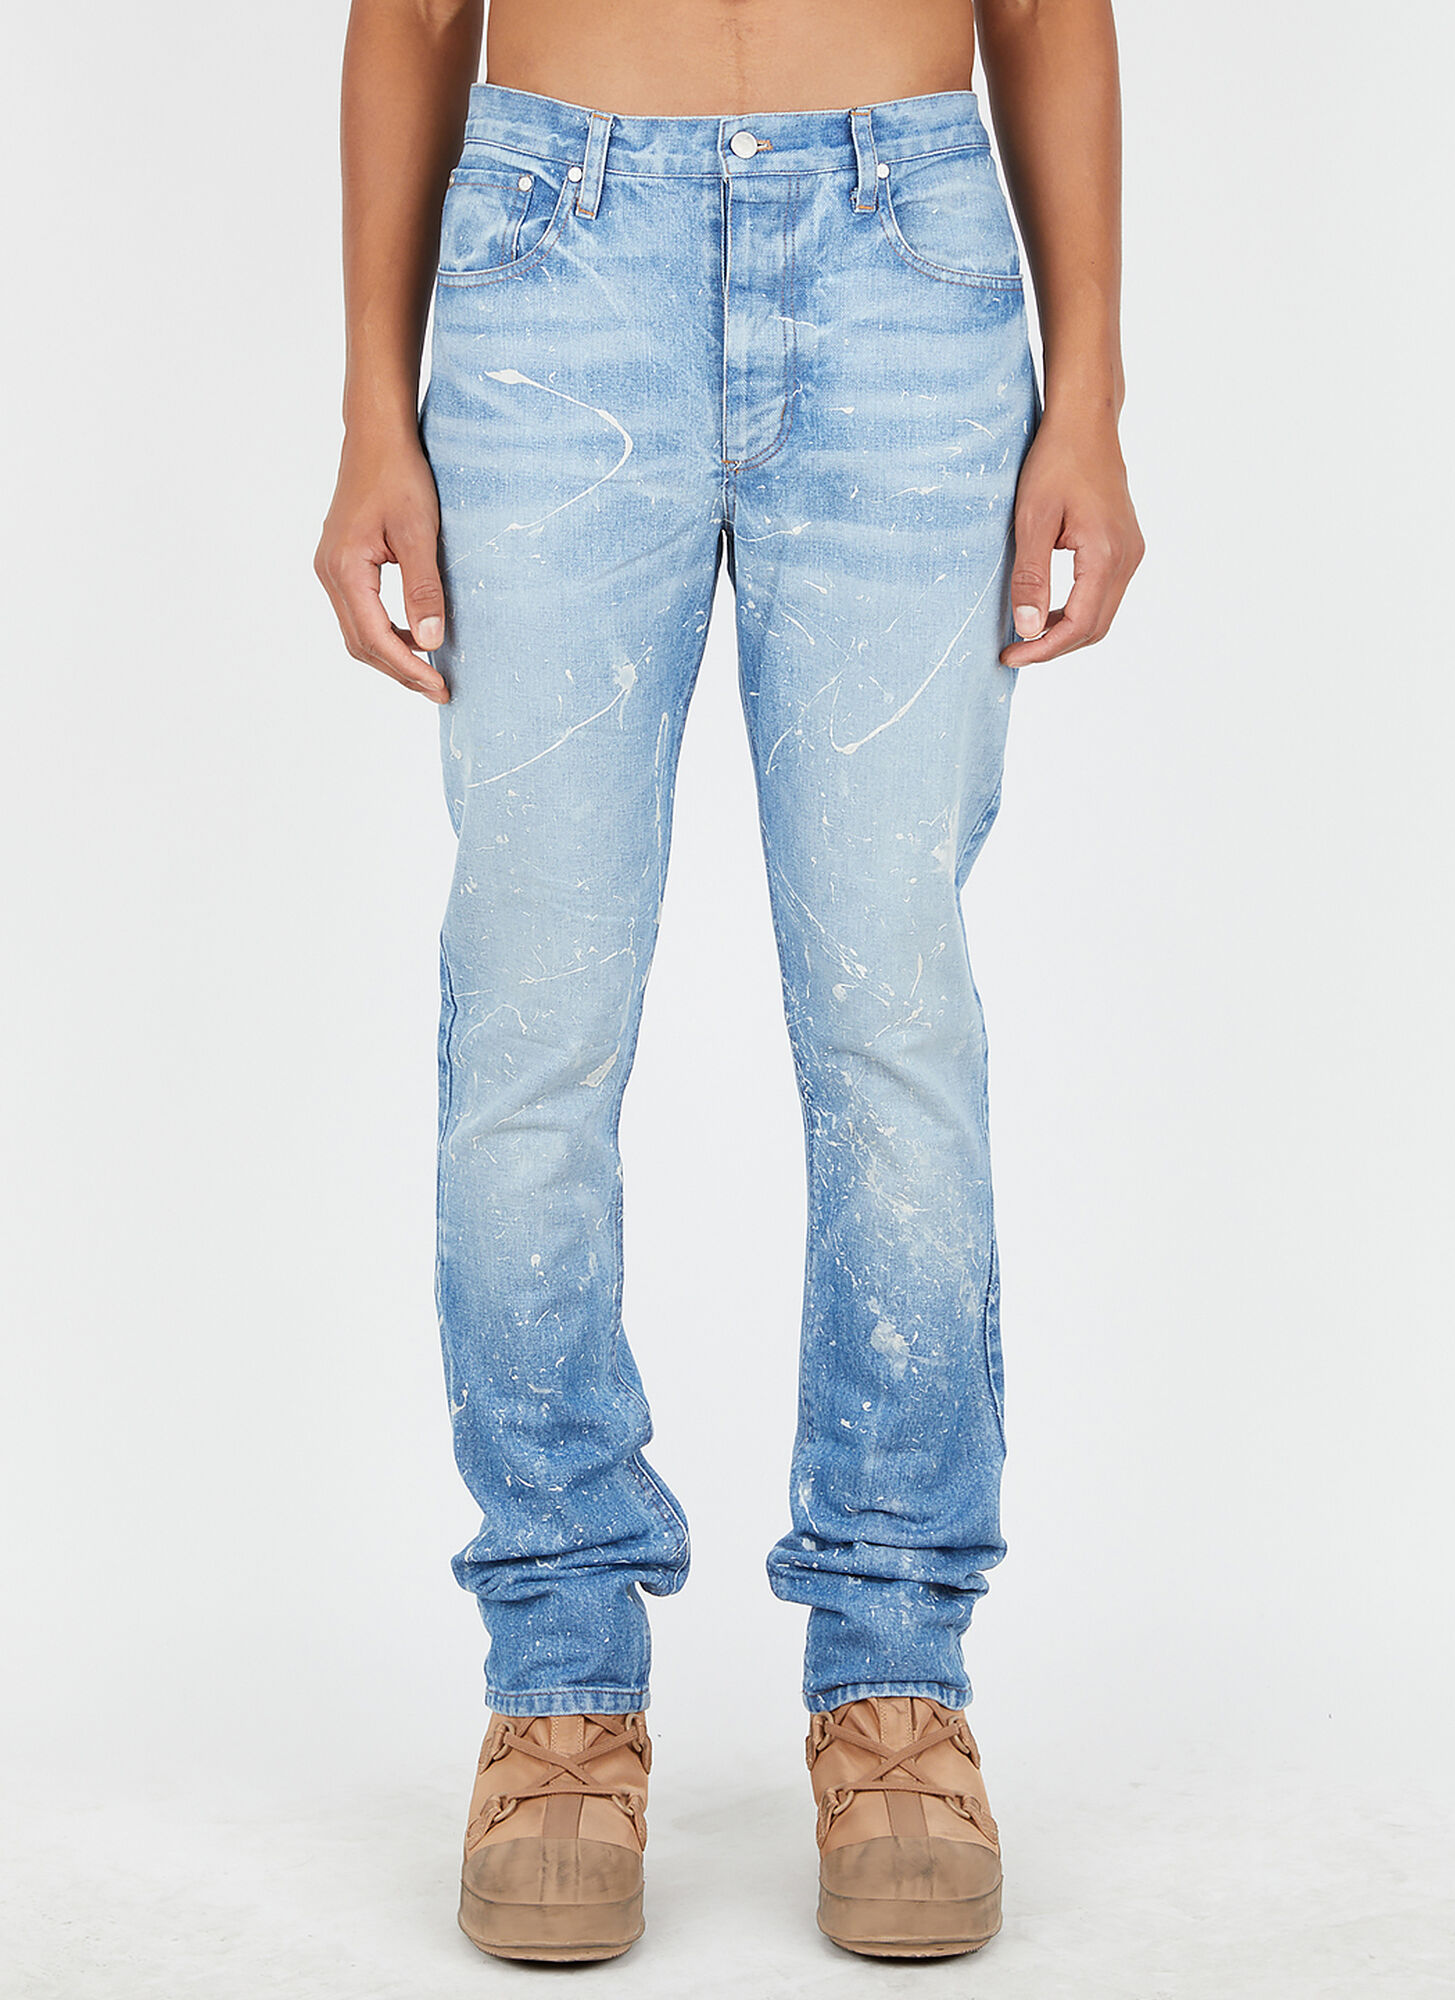 Bstroy (b).rucker Jeans